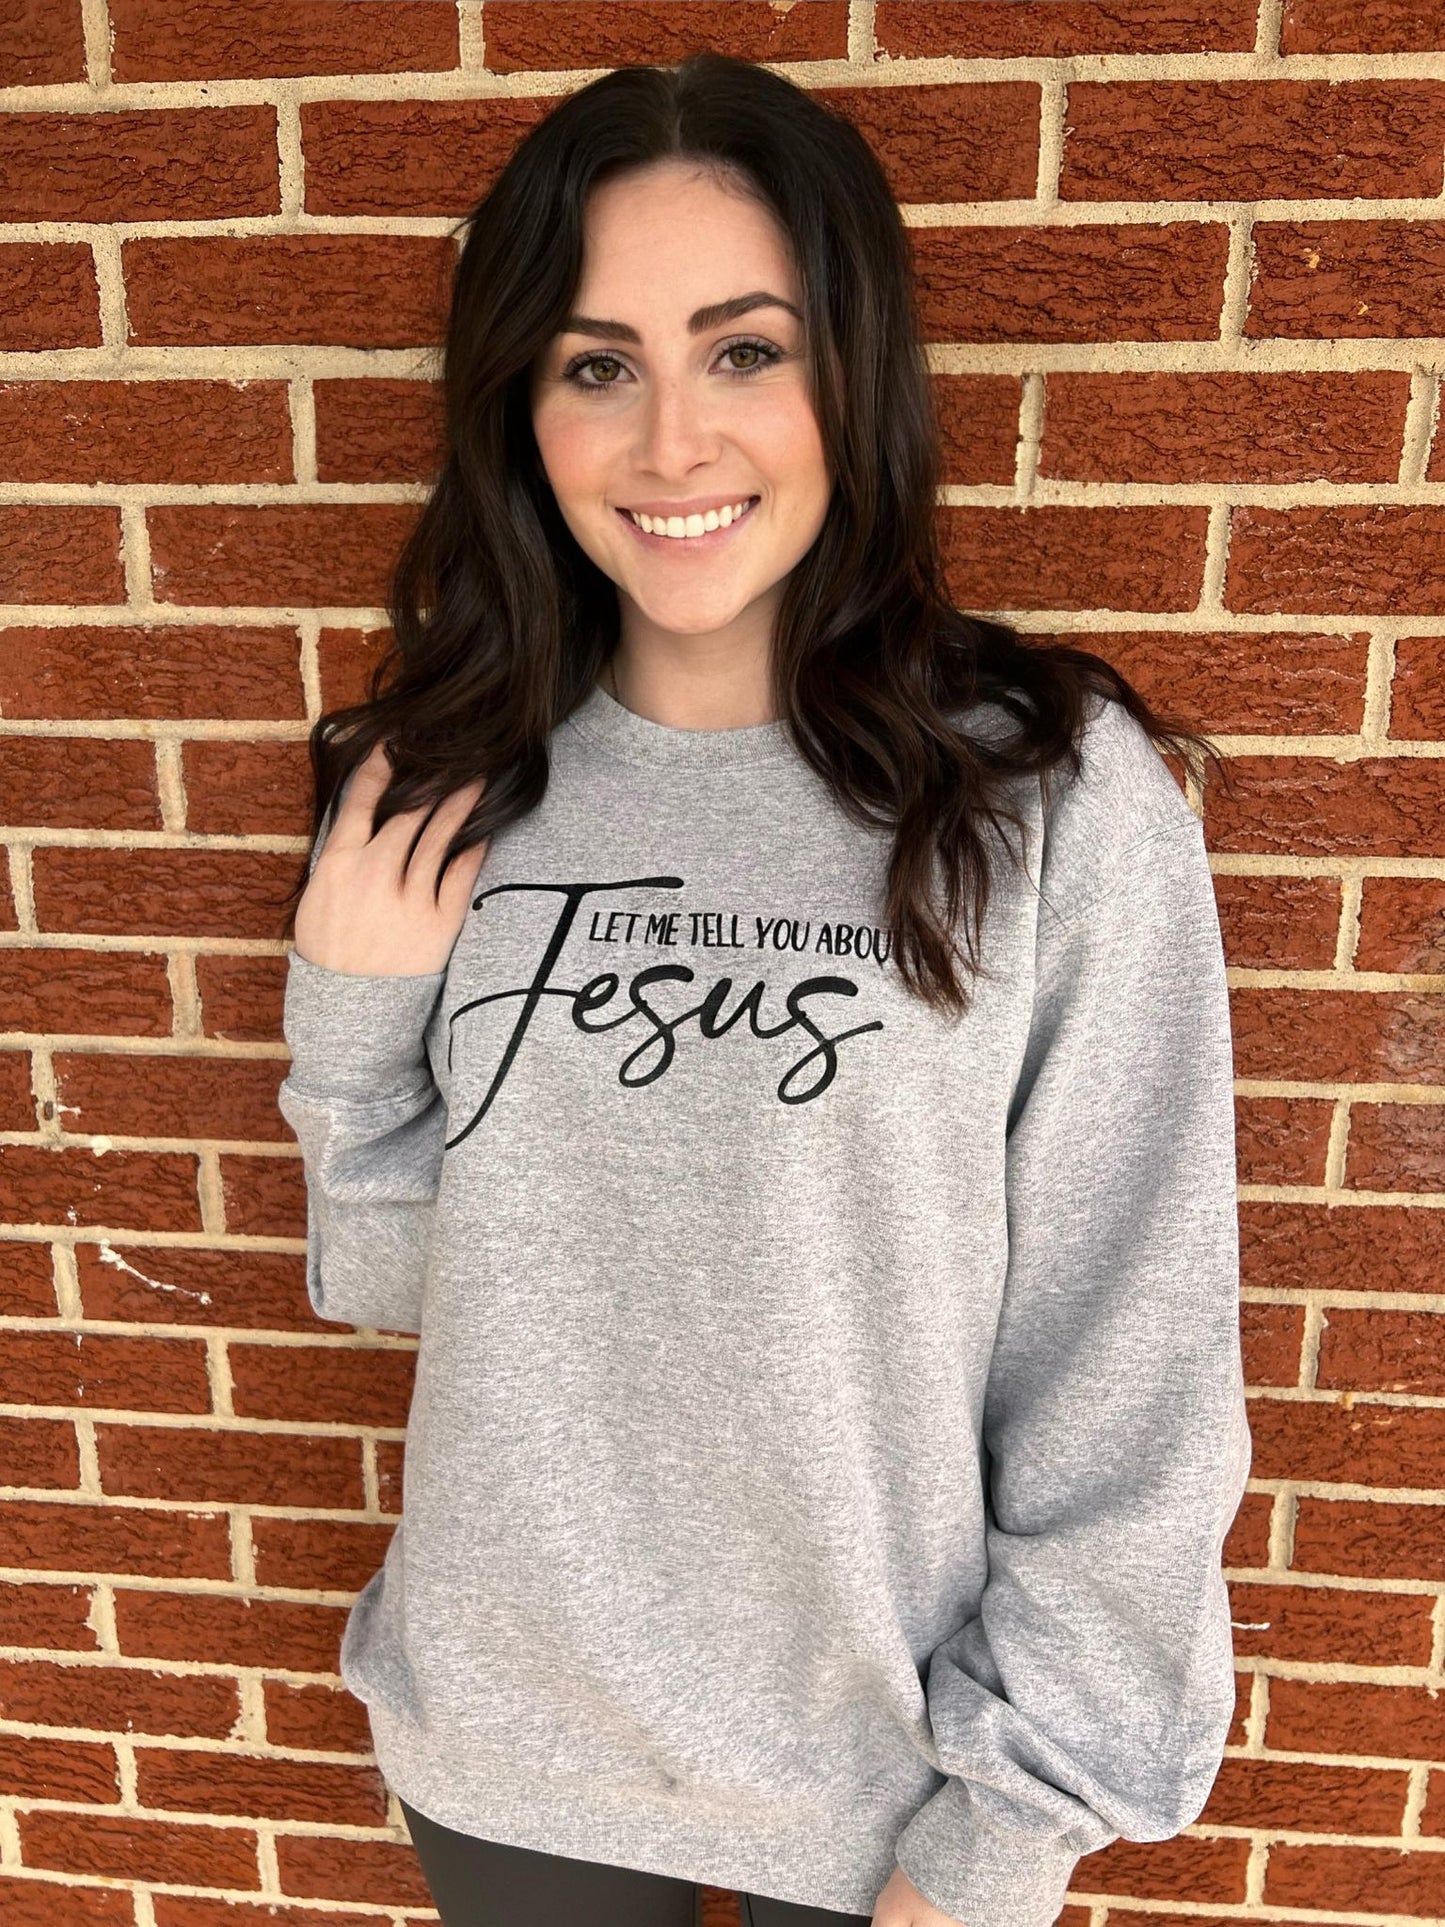 Let Me Tell You About My Jesus Sweatshirt- ASK Apparel LLC